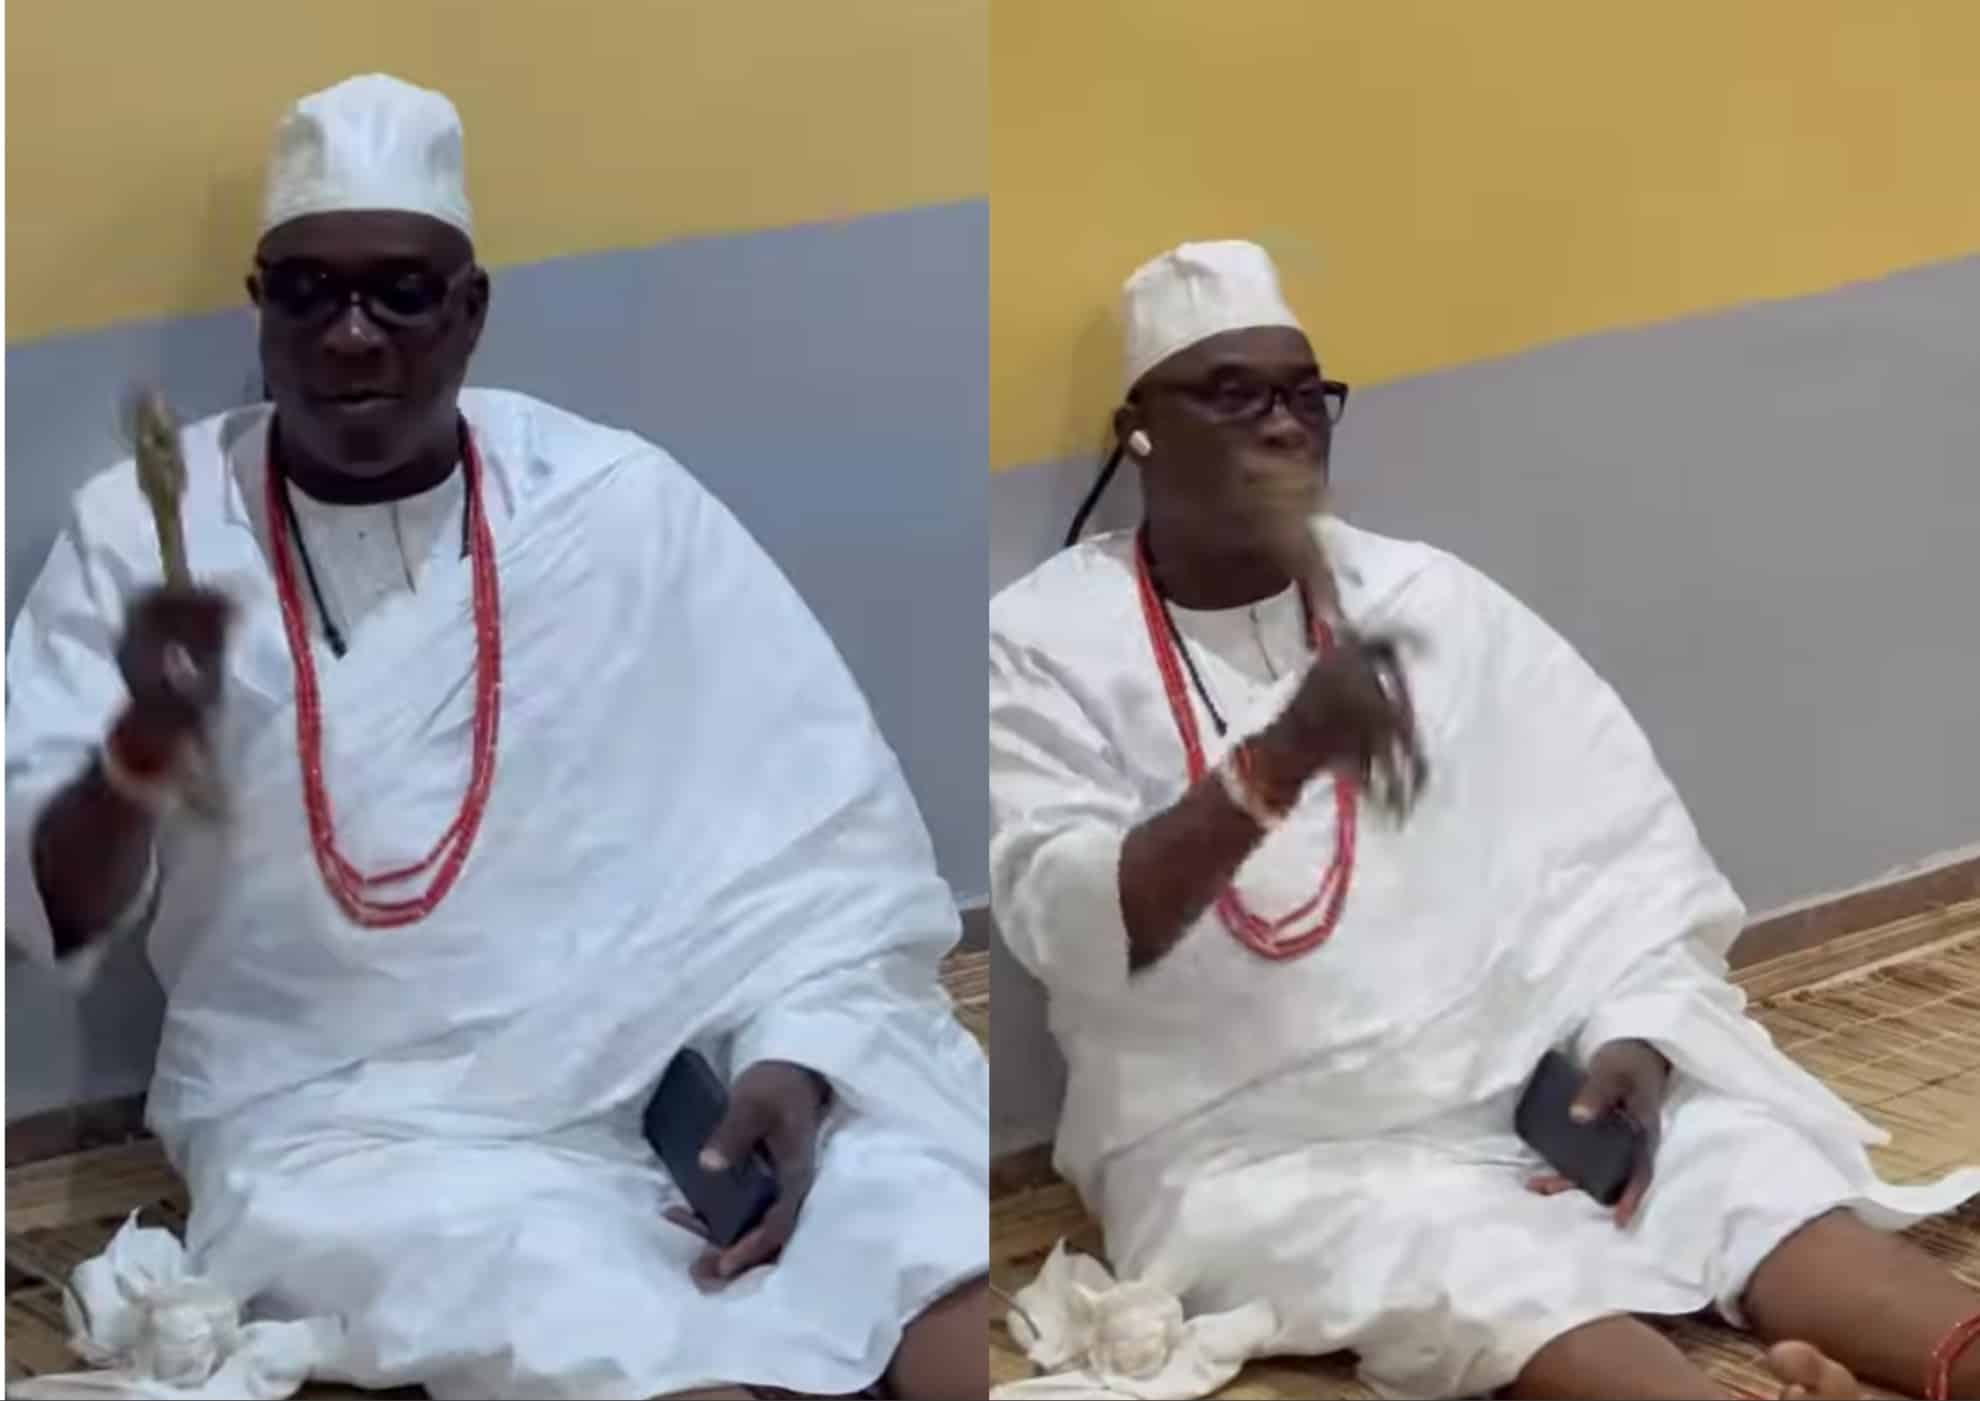 K1 De Ultimate Completes Rites For Chieftaincy After 7-Day Seclusion (Video)